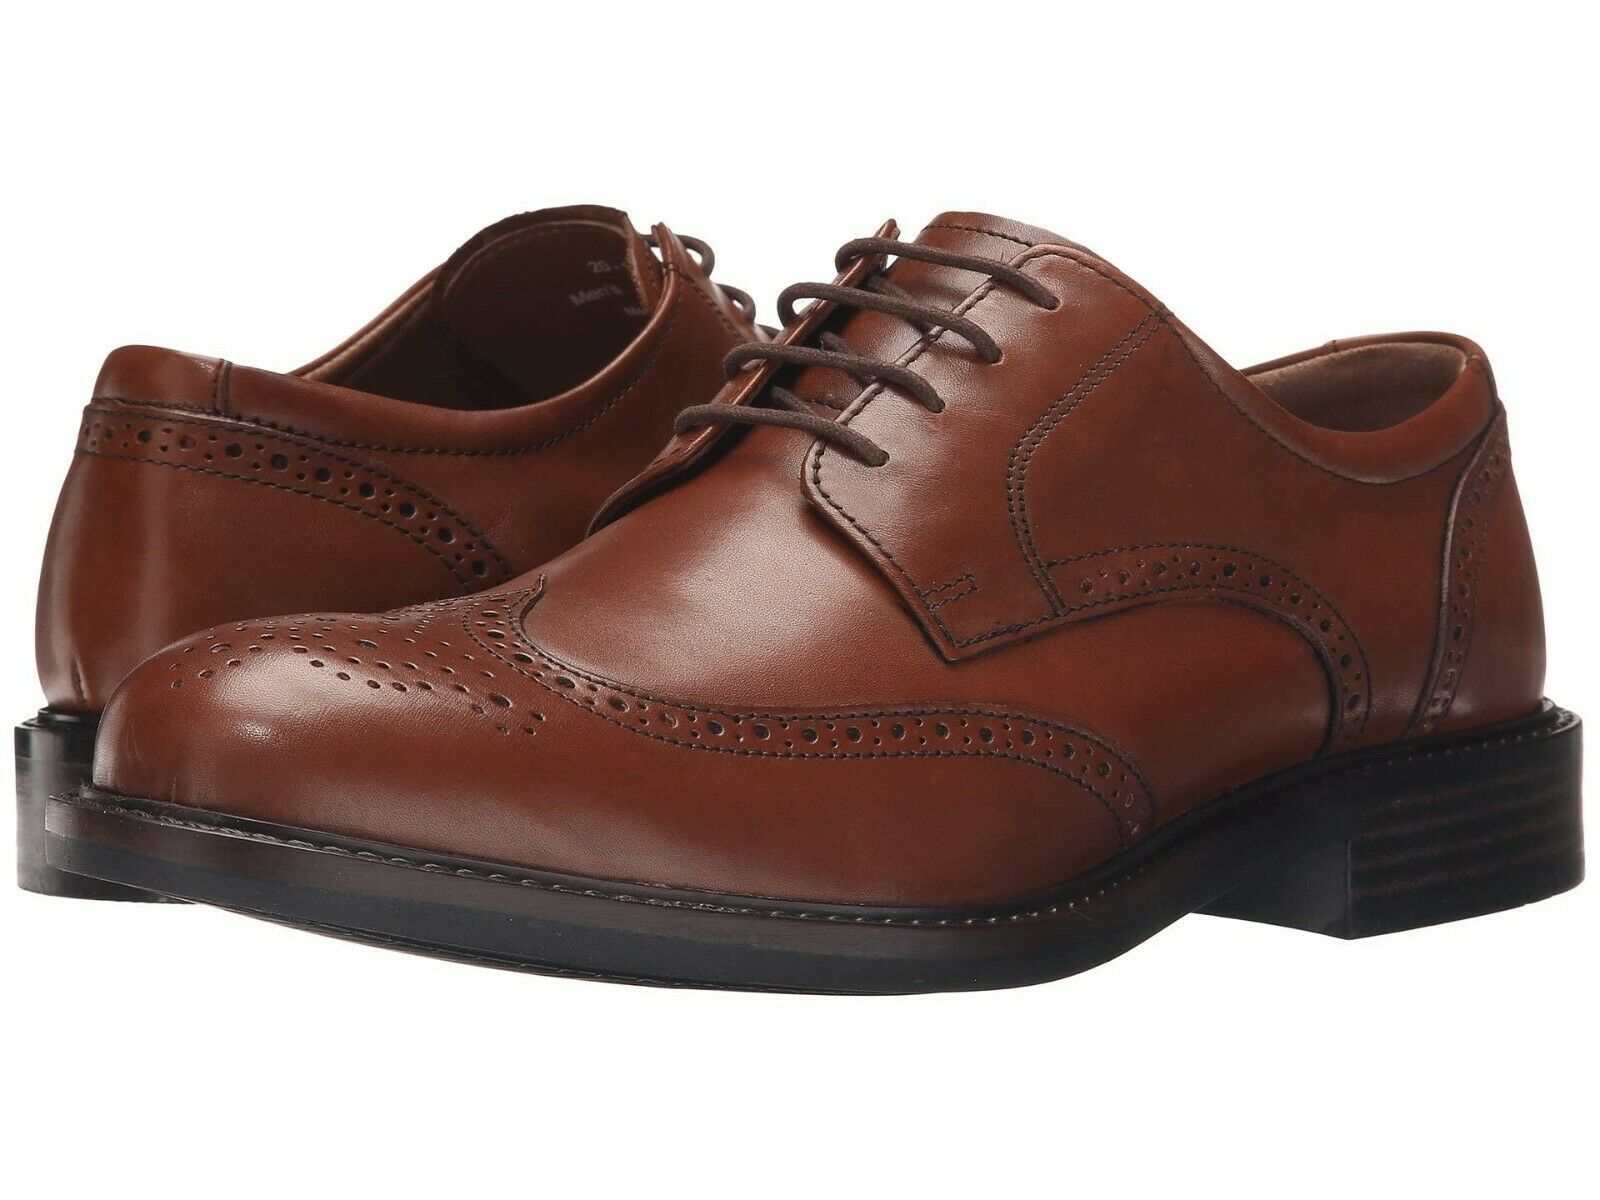 Primary image for Men's Johnston & Murphy Tabor Wingtip Leather Oxfords, 20-1862 Multipl Sizes Tan